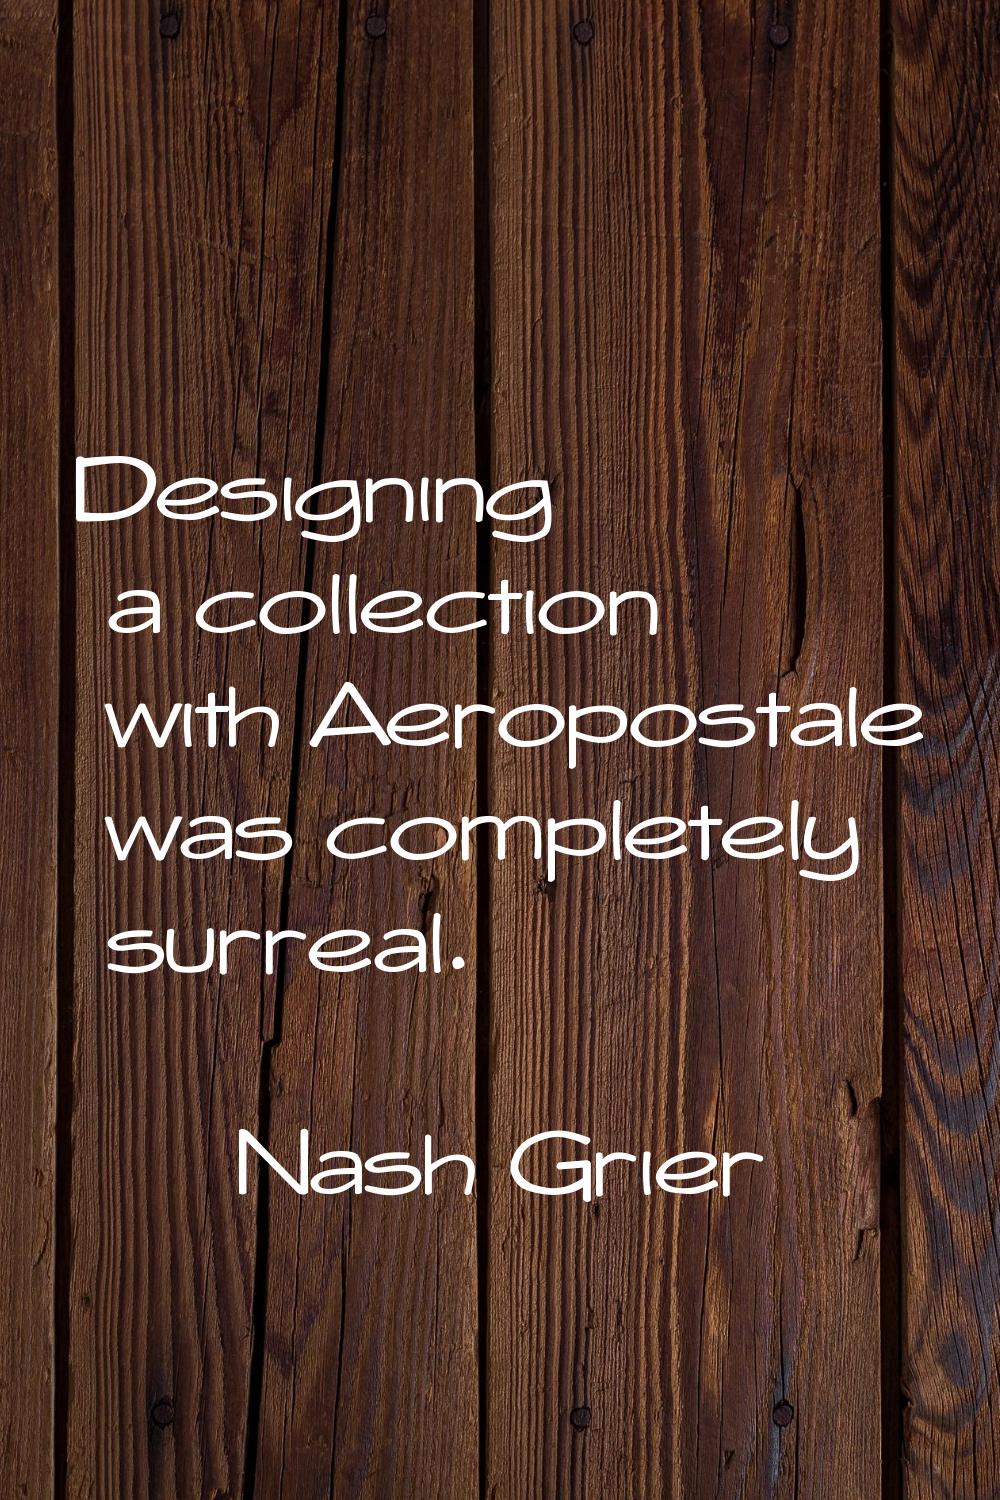 Designing a collection with Aeropostale was completely surreal.